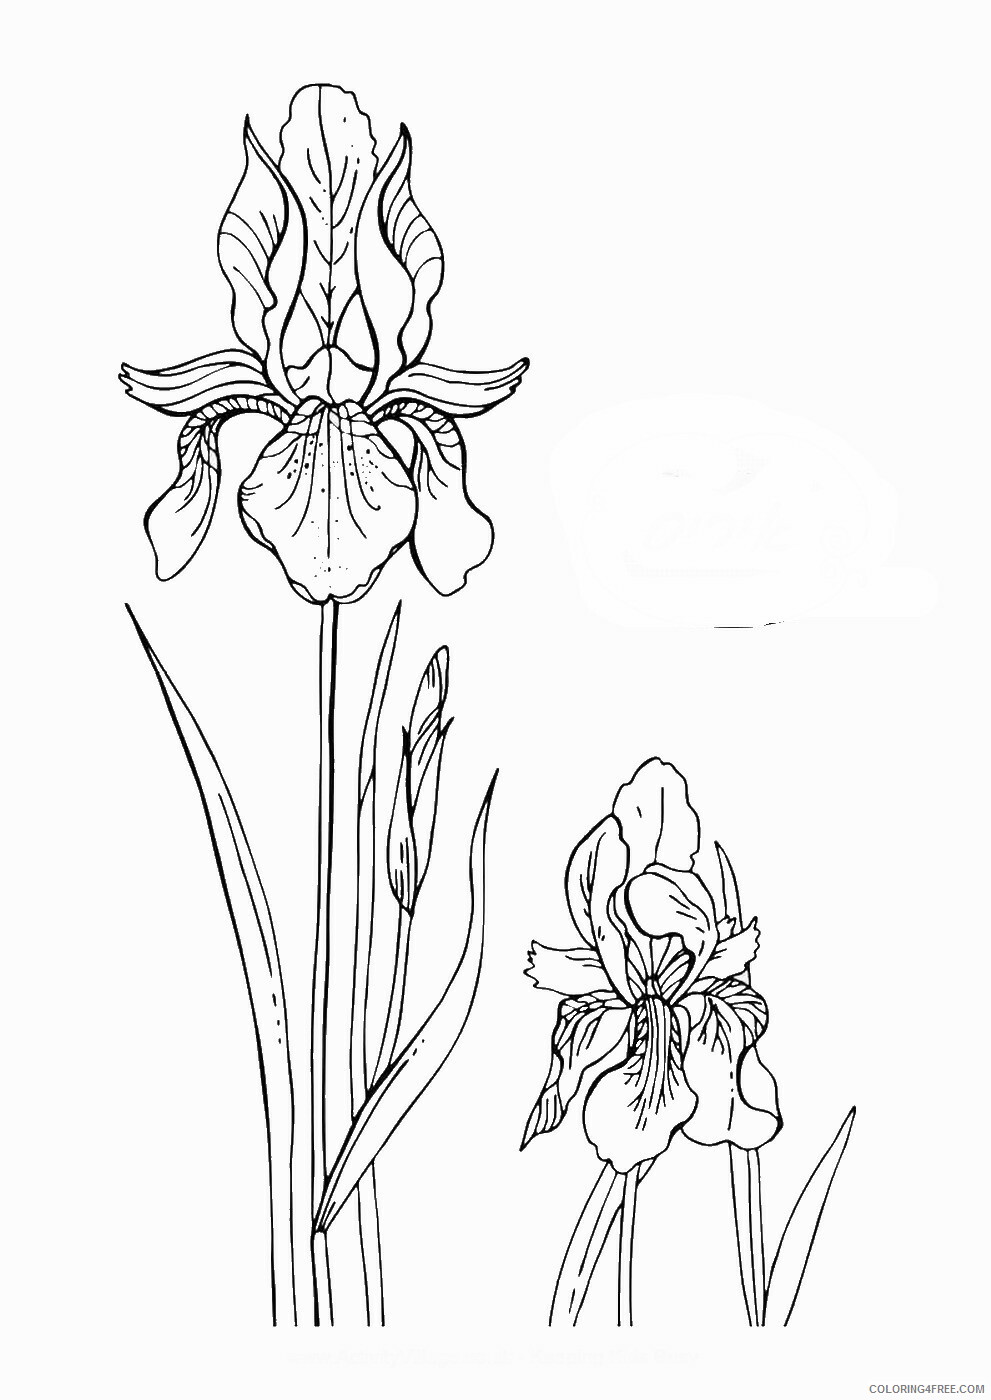 Printable Flower Coloring Pages Flowers Nature flowerc125 Printable 2021 377 Coloring4free